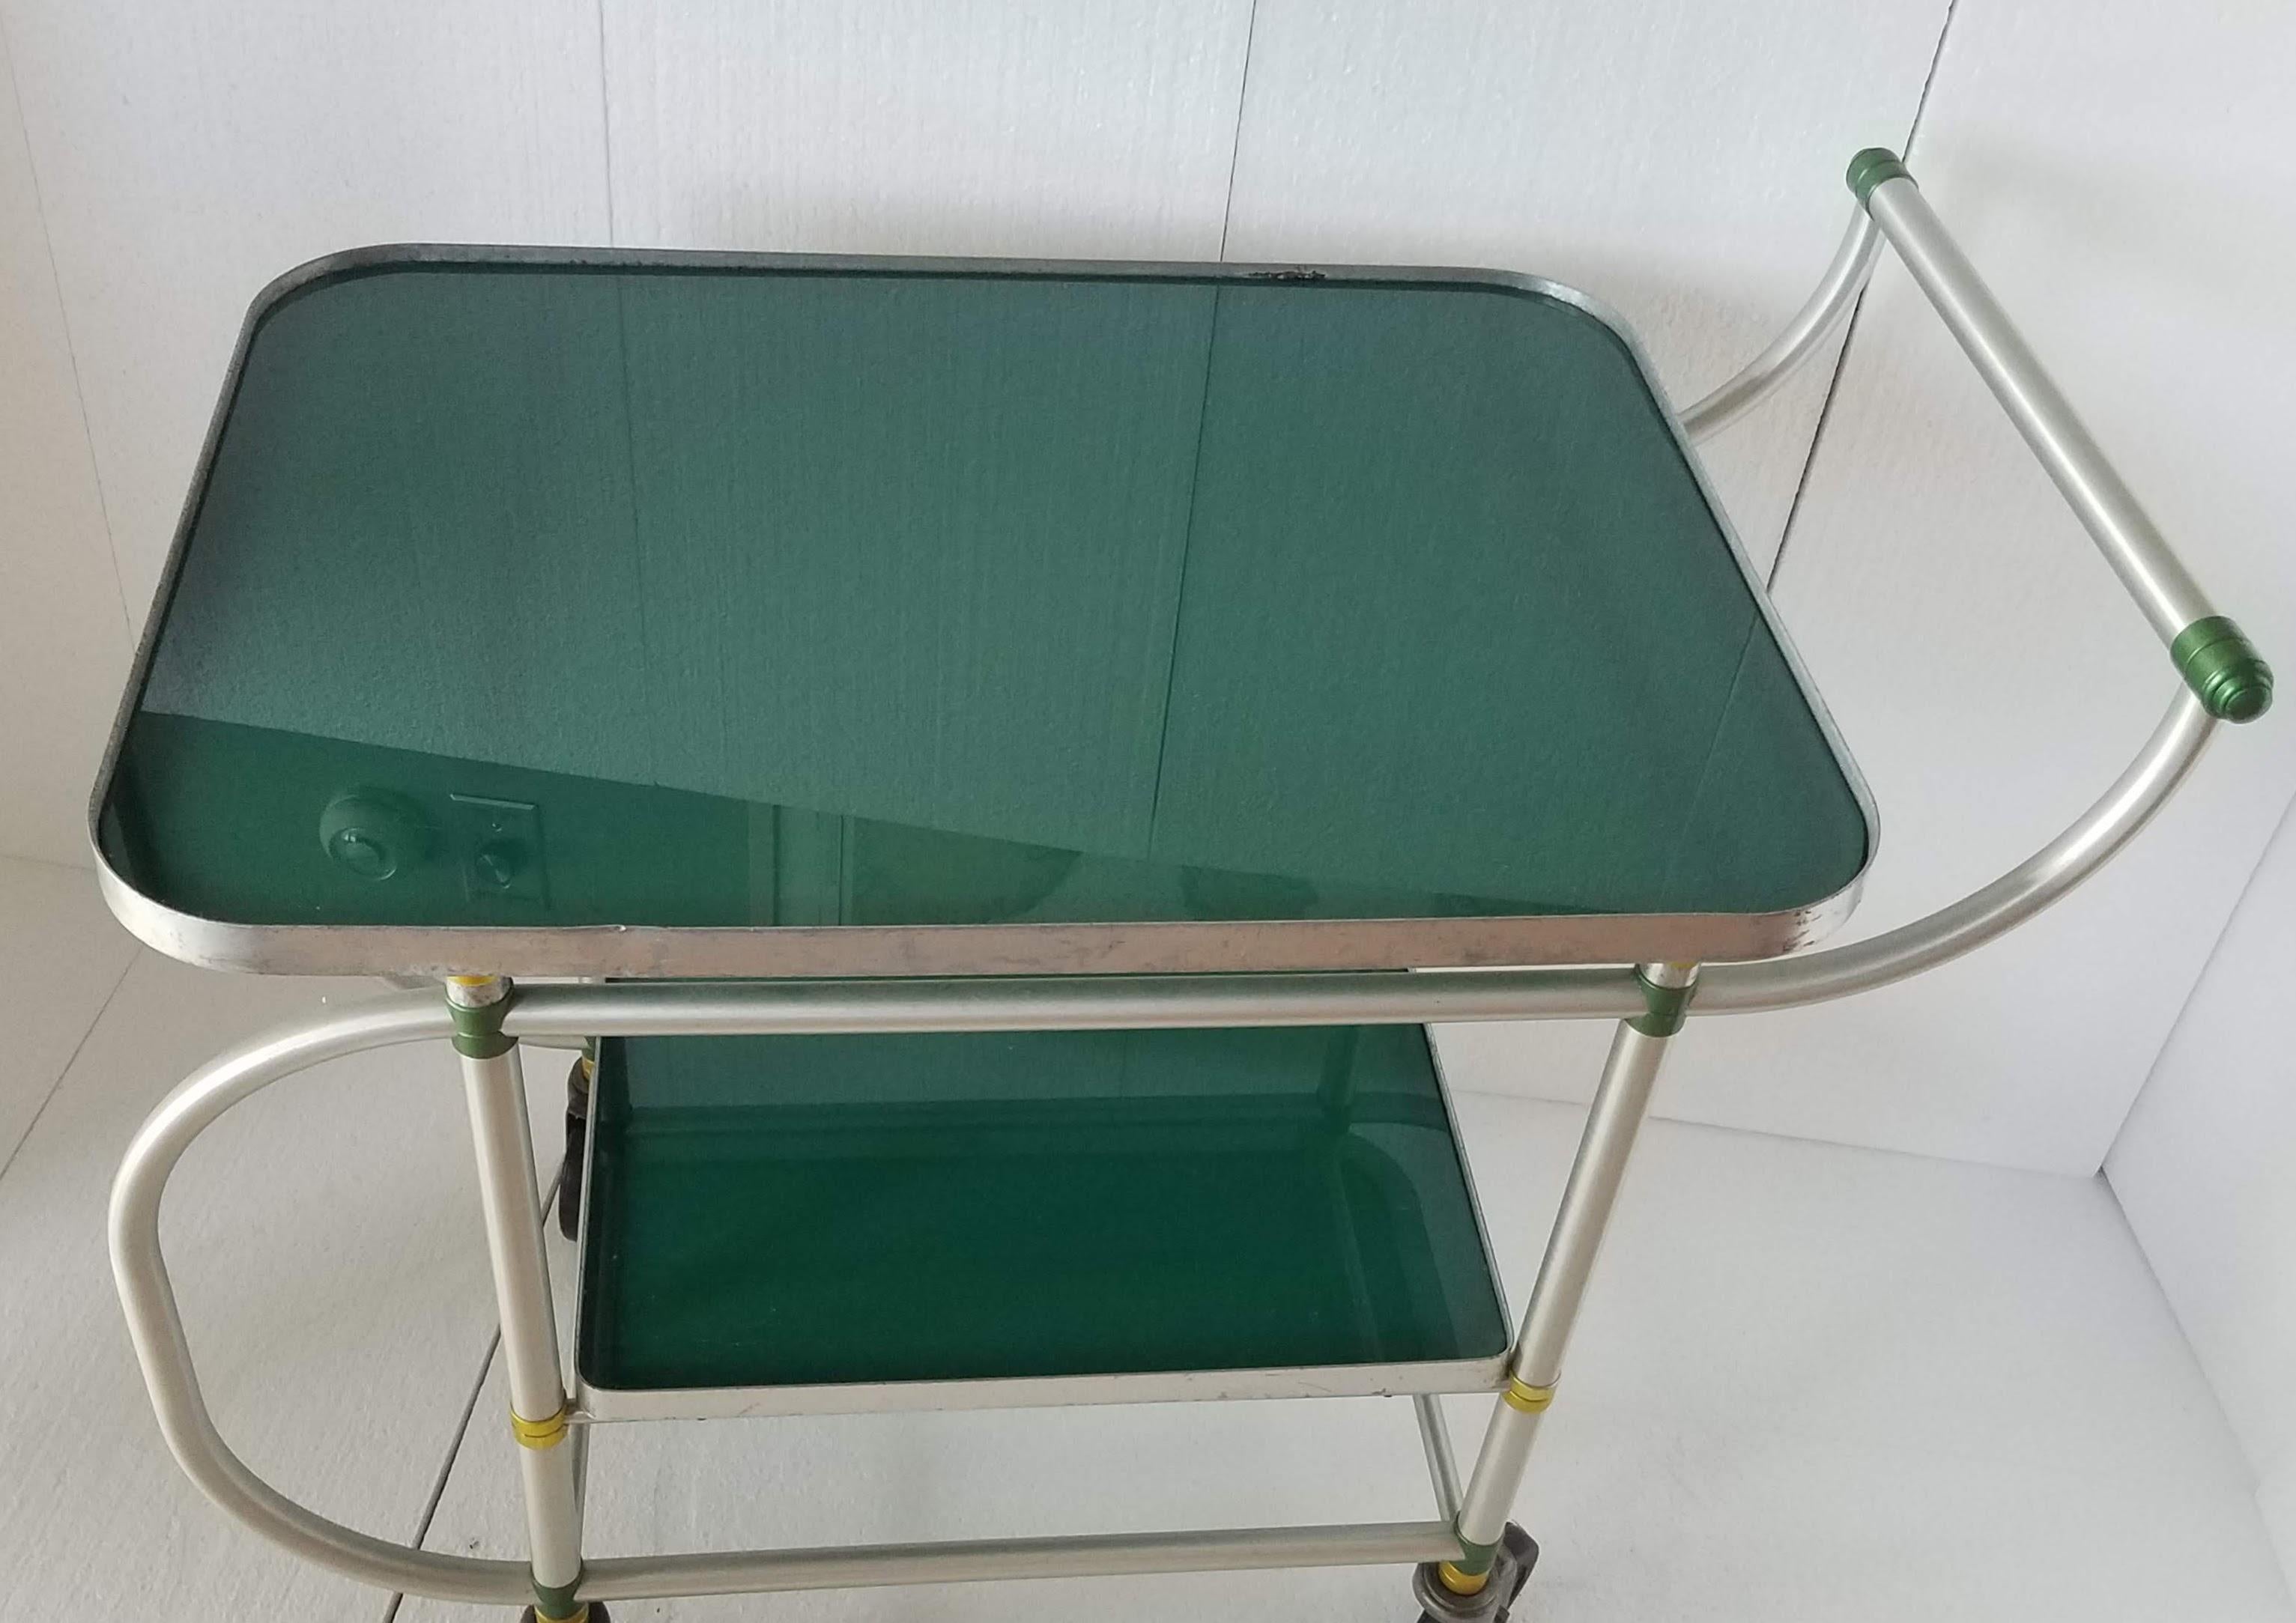 Rare Warren McArthur bar cart / service cart from the late 1930s with yellow and green turnings. 
Green Vitrolite shelf inserts are replacements.
Good condition.